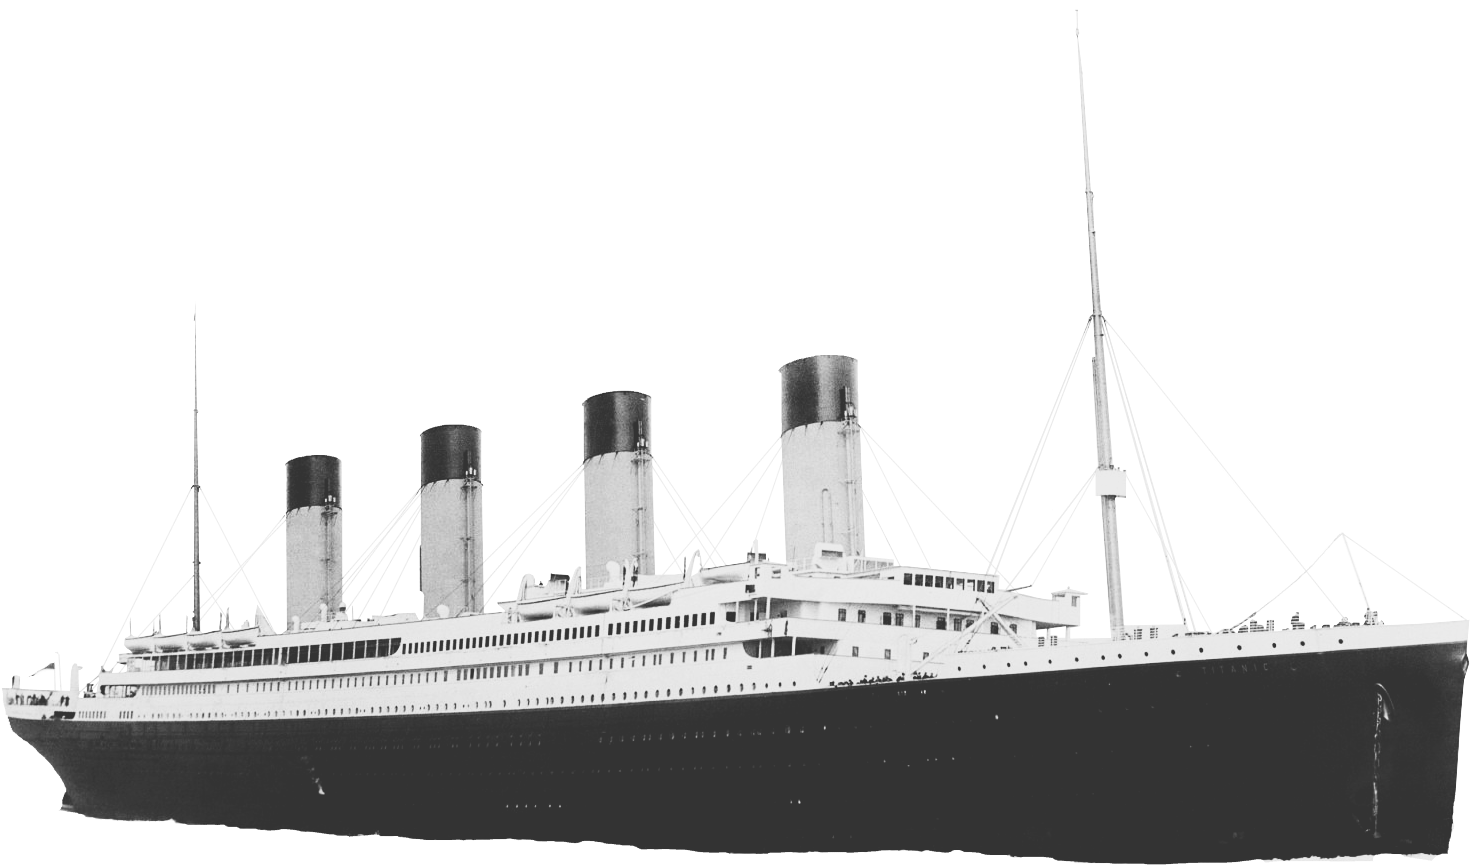 A Large Ship With Multiple Chimneys